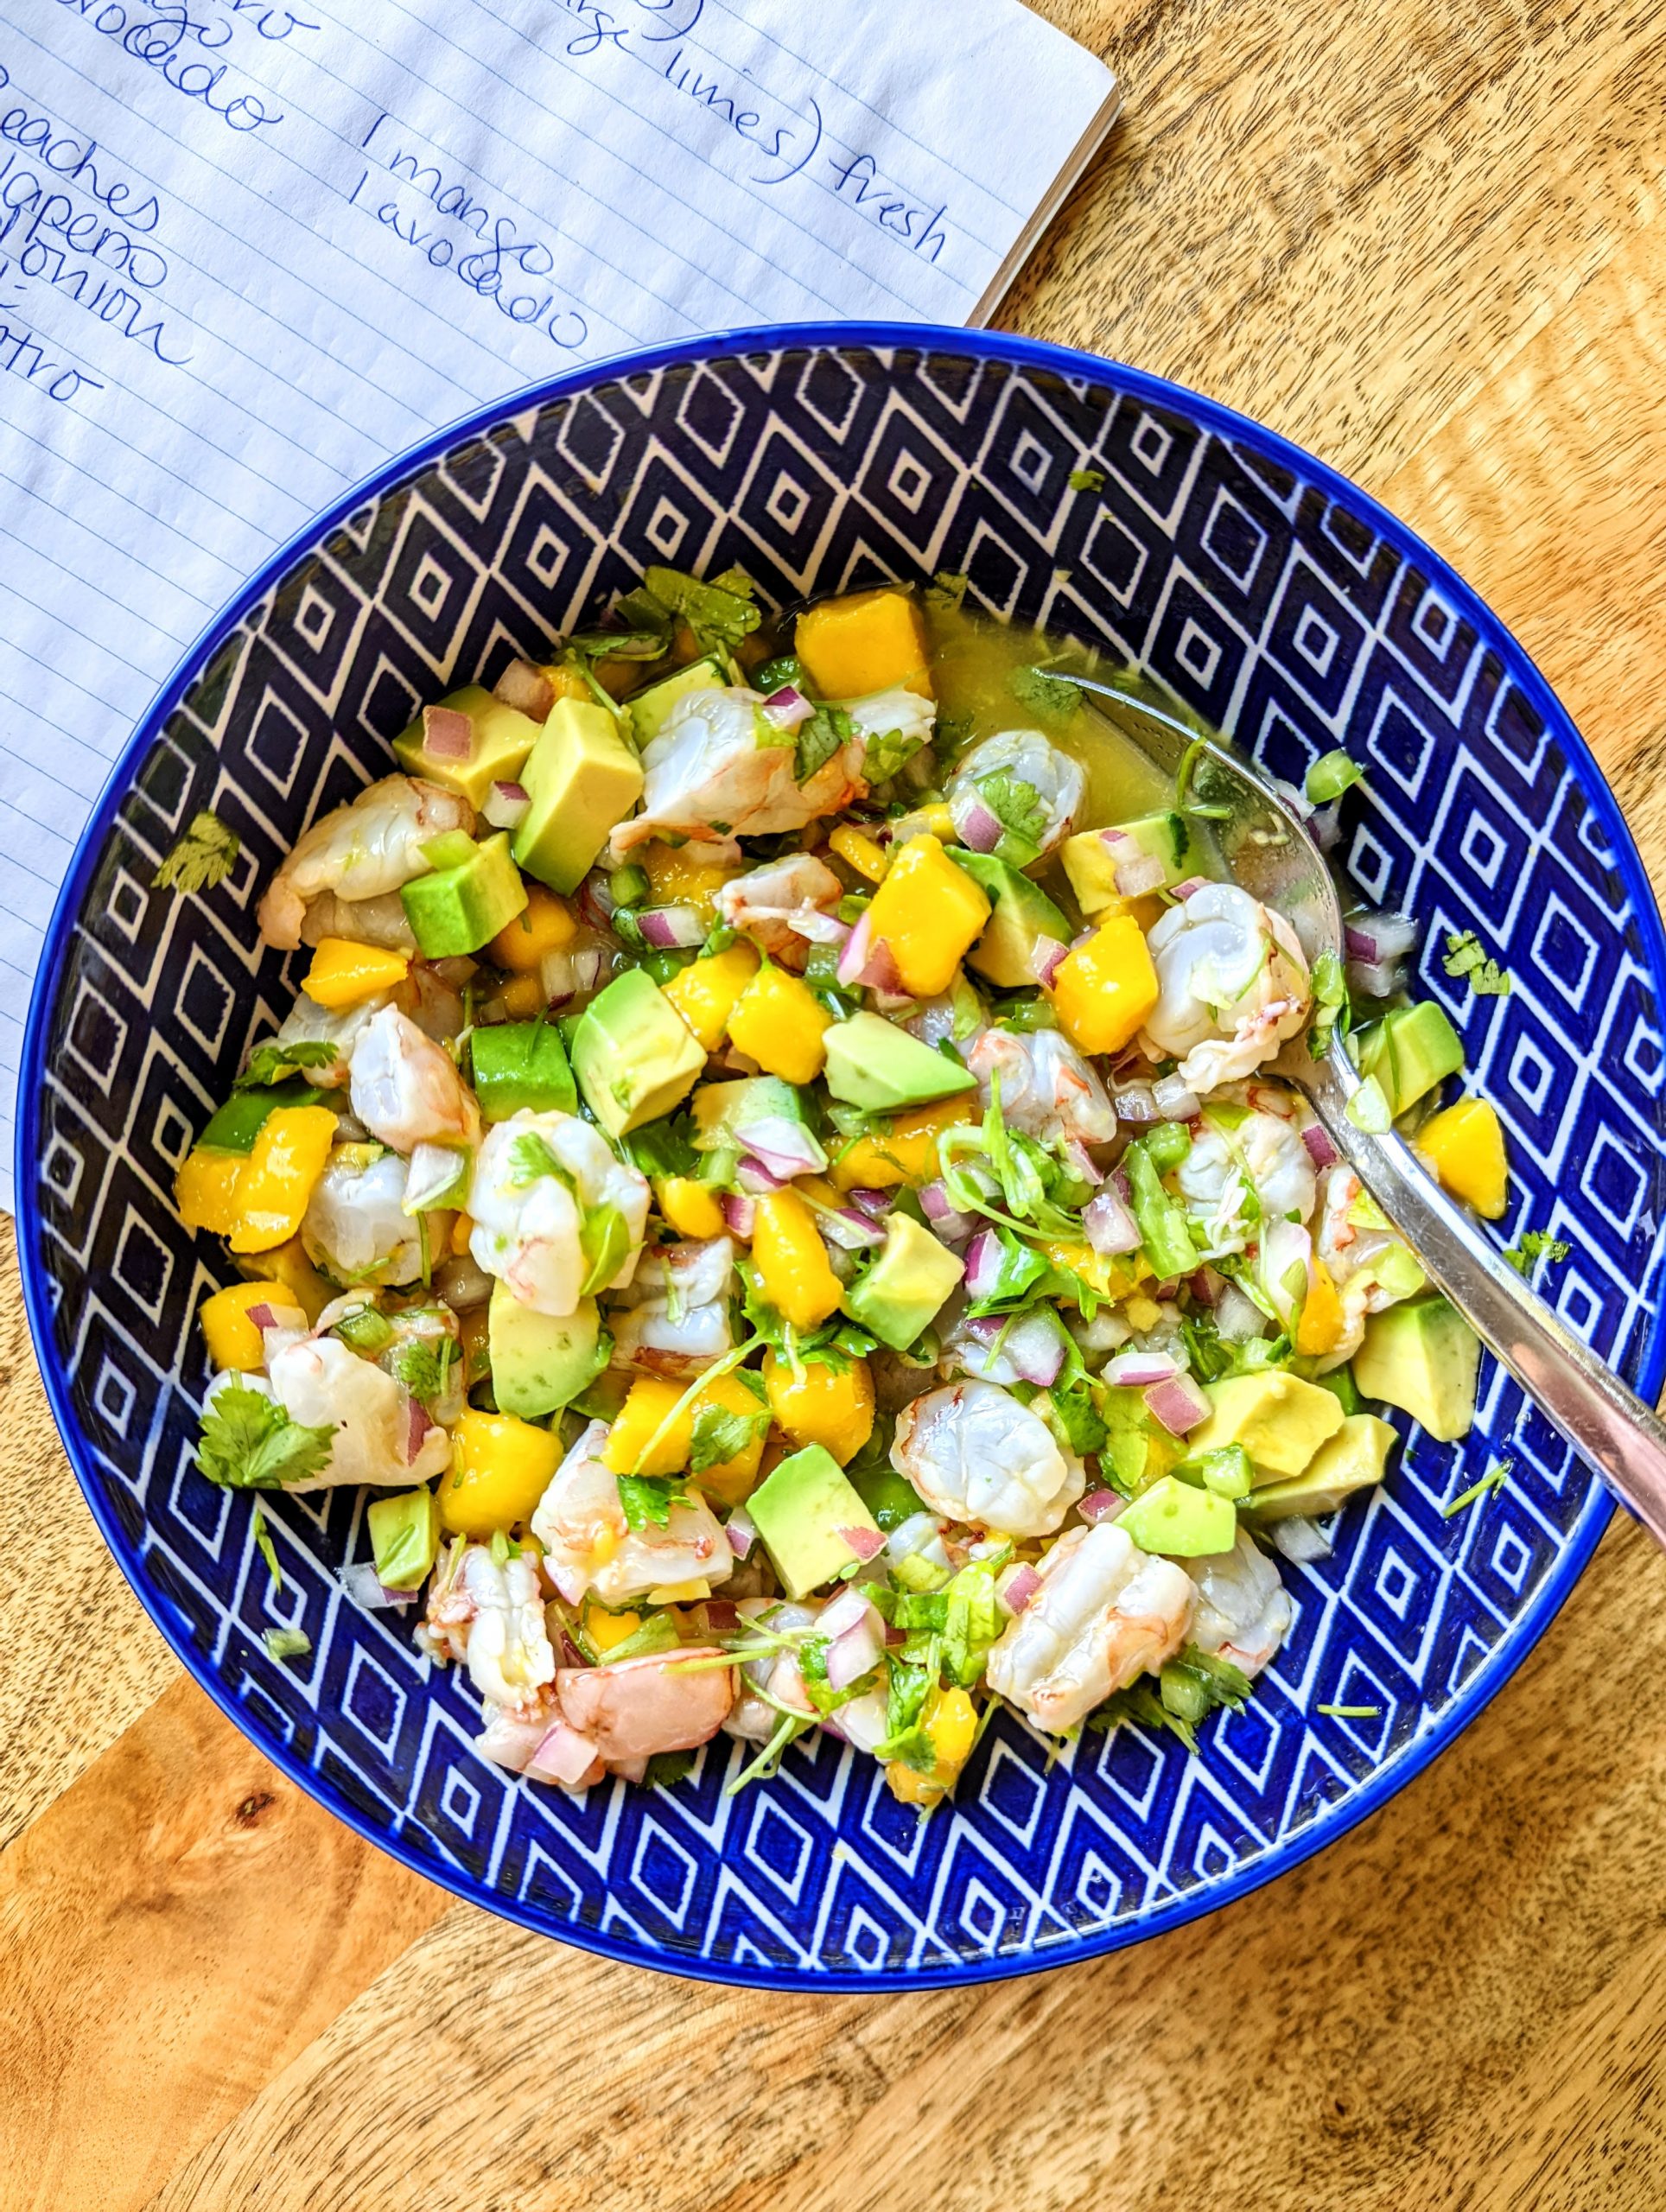 Shrimp ceviche with mango and avocado being mixed together in a bright blue and white bowl. The bowl rests on top of a notebook with part of the recipe written in pen.